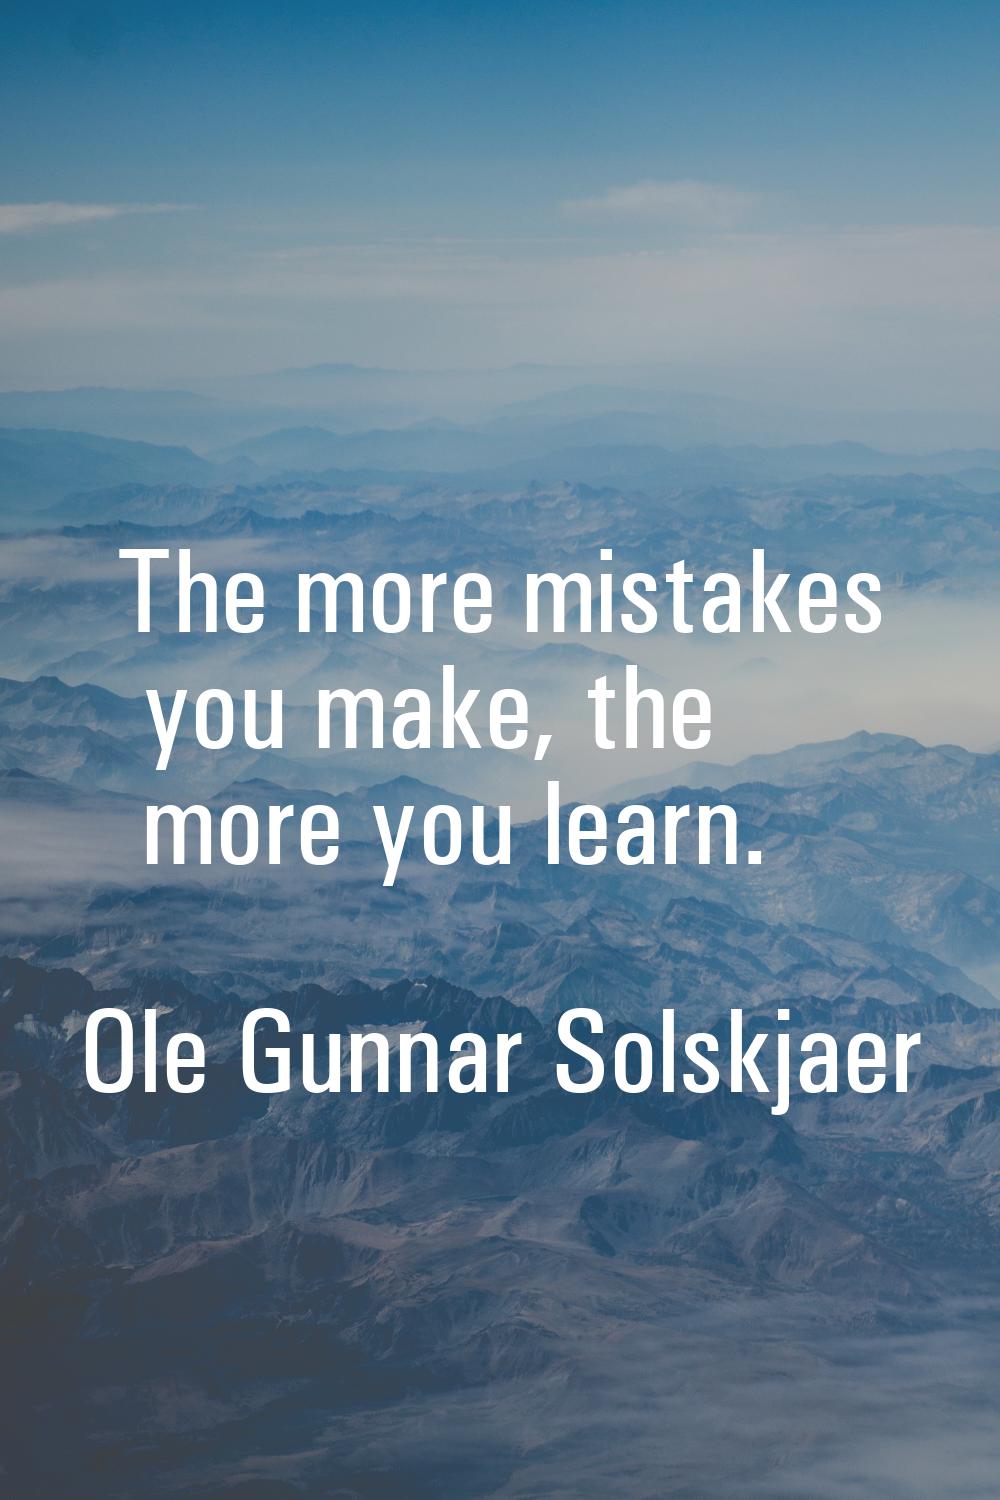 The more mistakes you make, the more you learn.